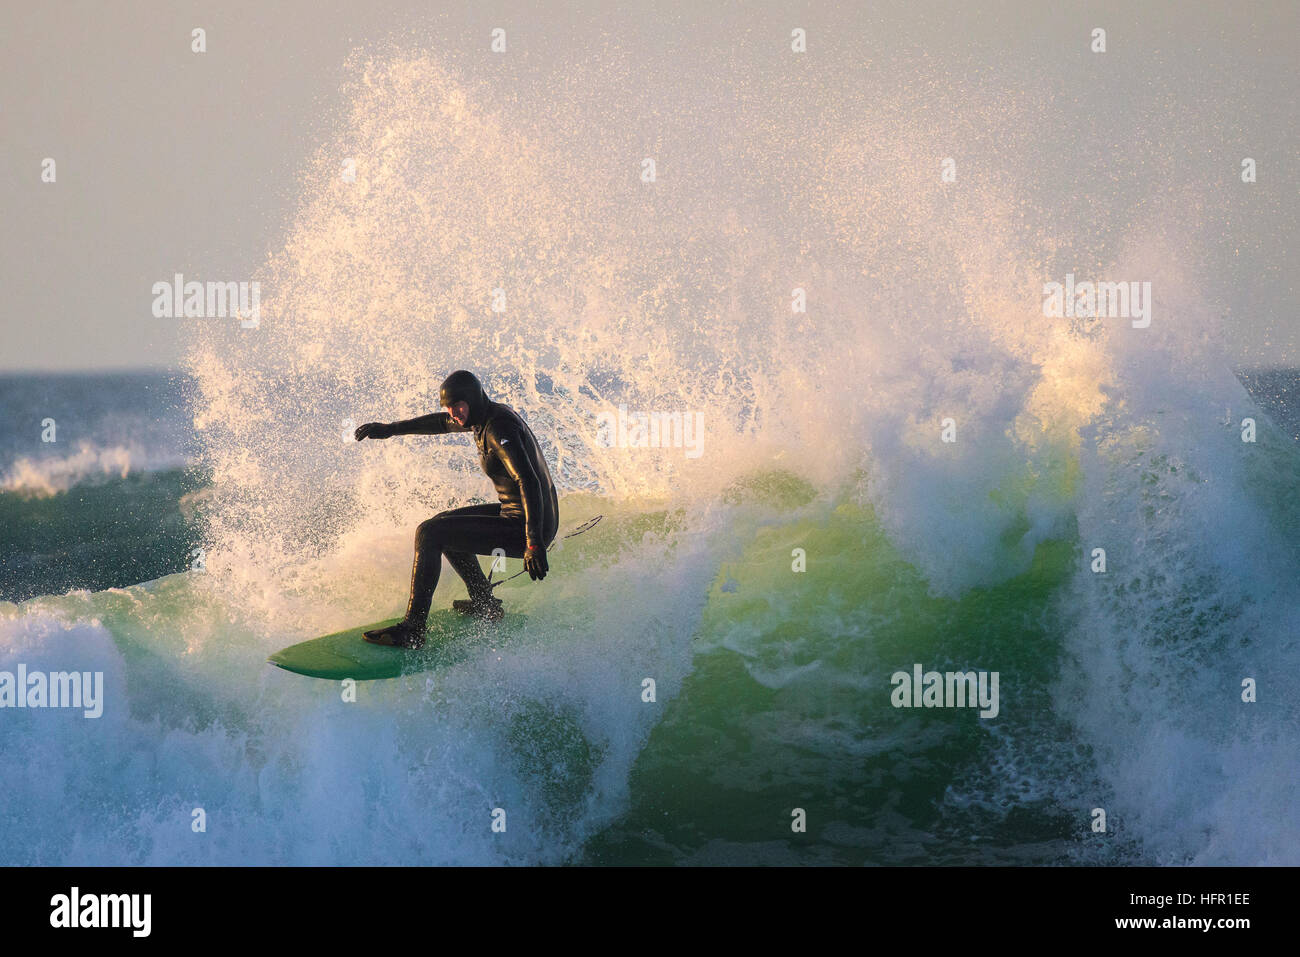 Ein Surfer am Fistral in Newquay, Cornwall. Stockfoto